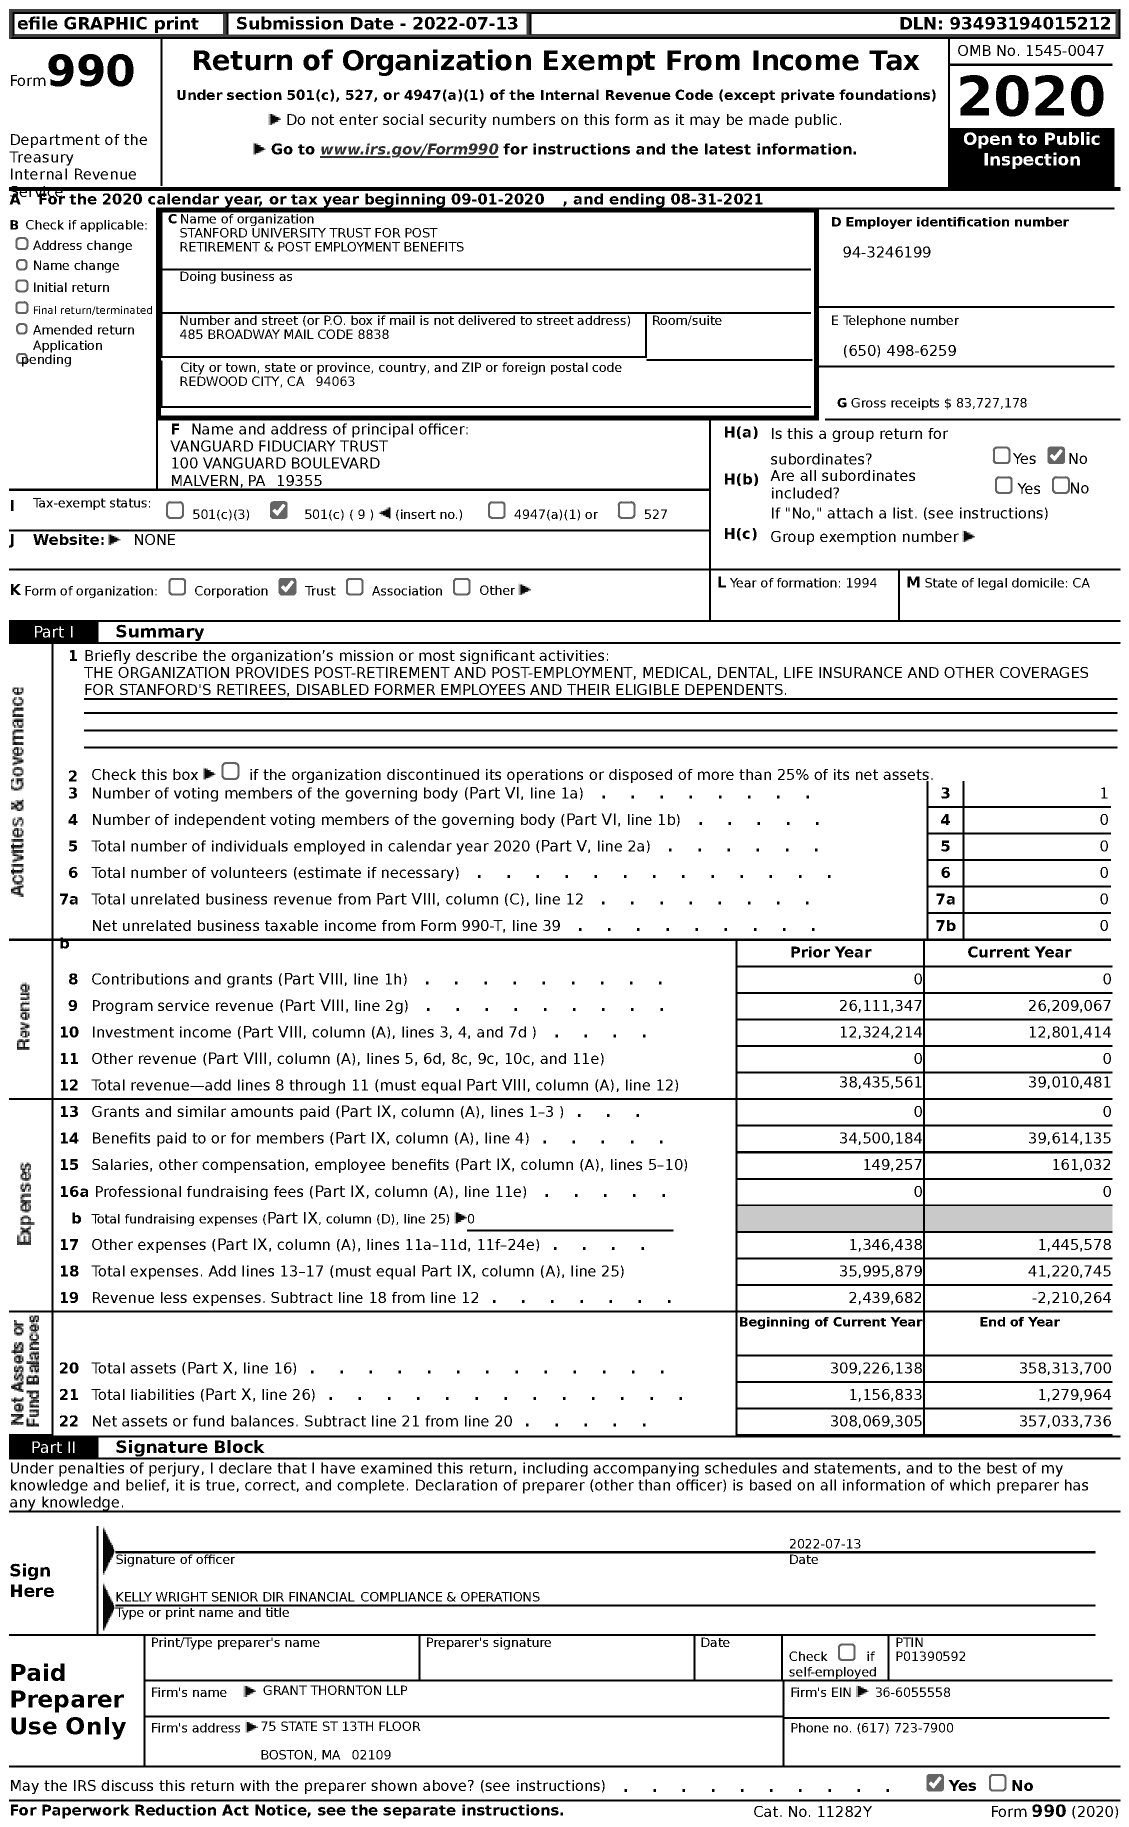 Image of first page of 2020 Form 990 for Stanford University Trust for Post Retirement and Post Employment Benefits